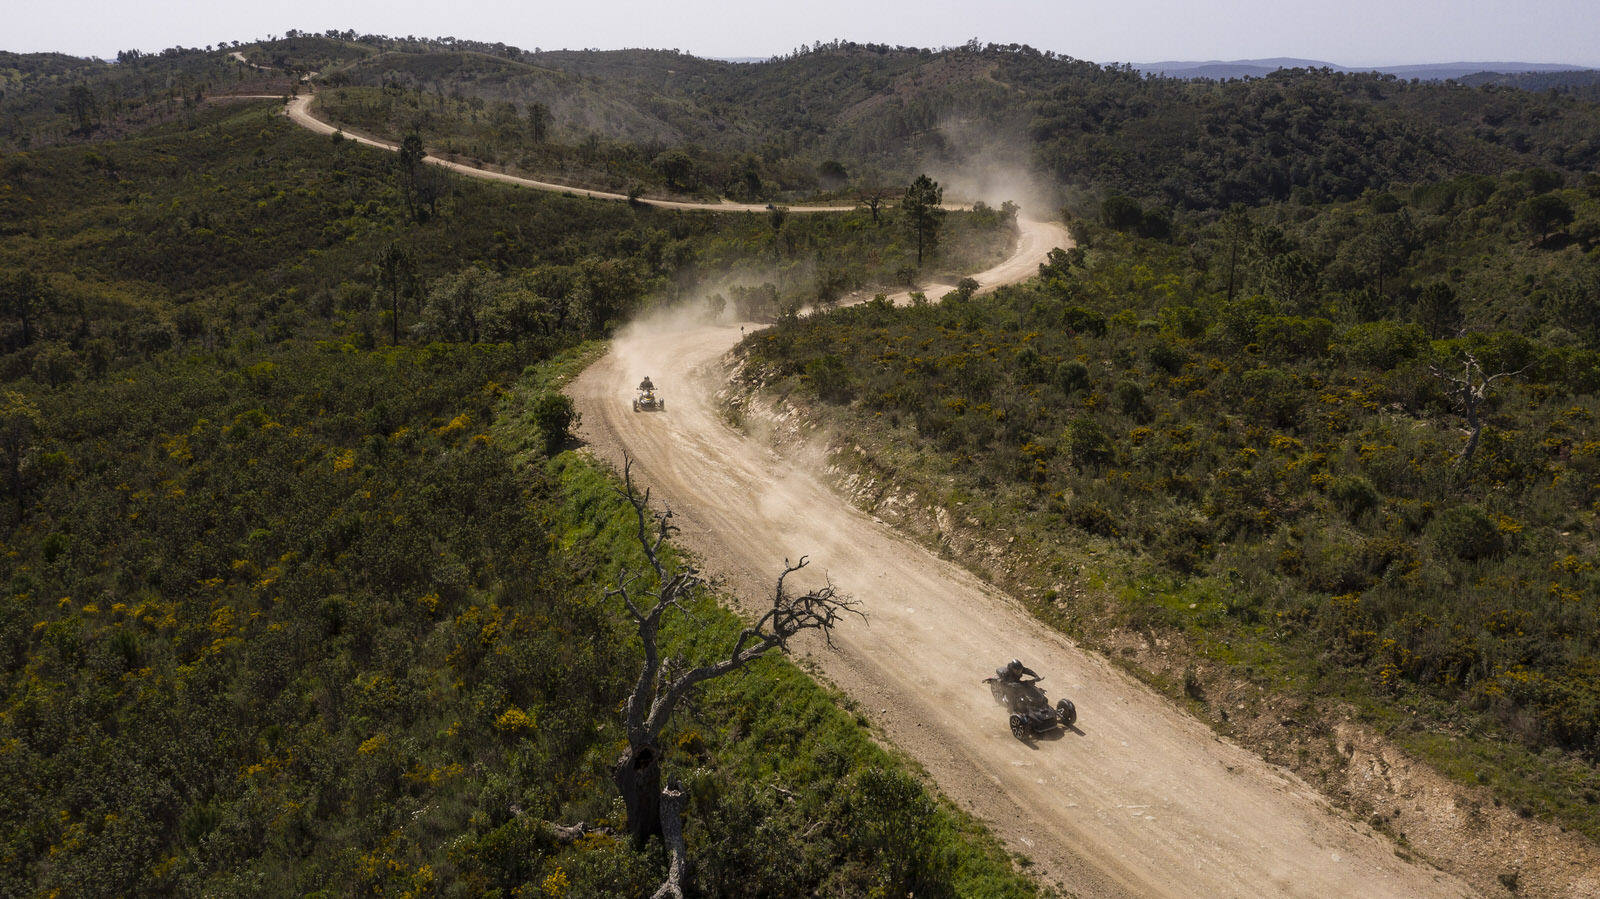 Three Can-Am Ryker driving Off-Road in Portugal